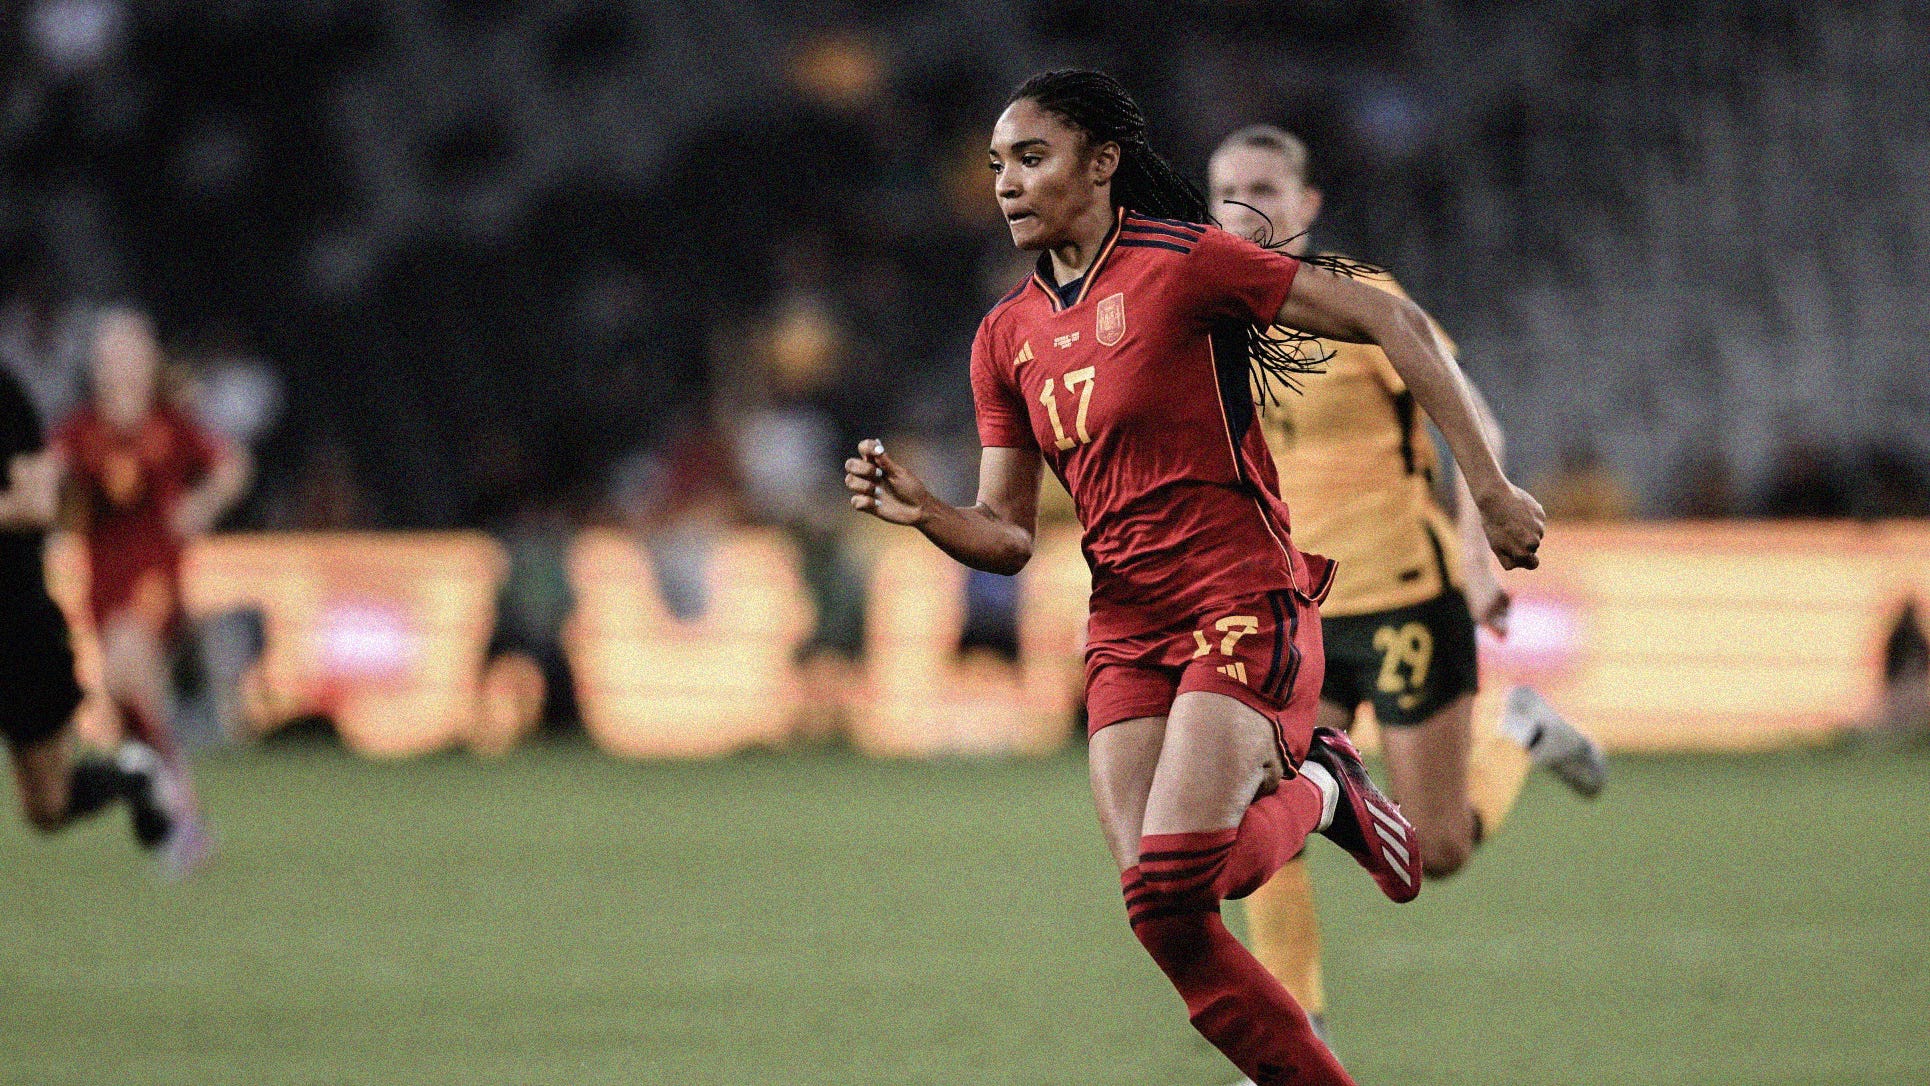 A photo of Salma Paralluelo chasing after the ball playing for Spain